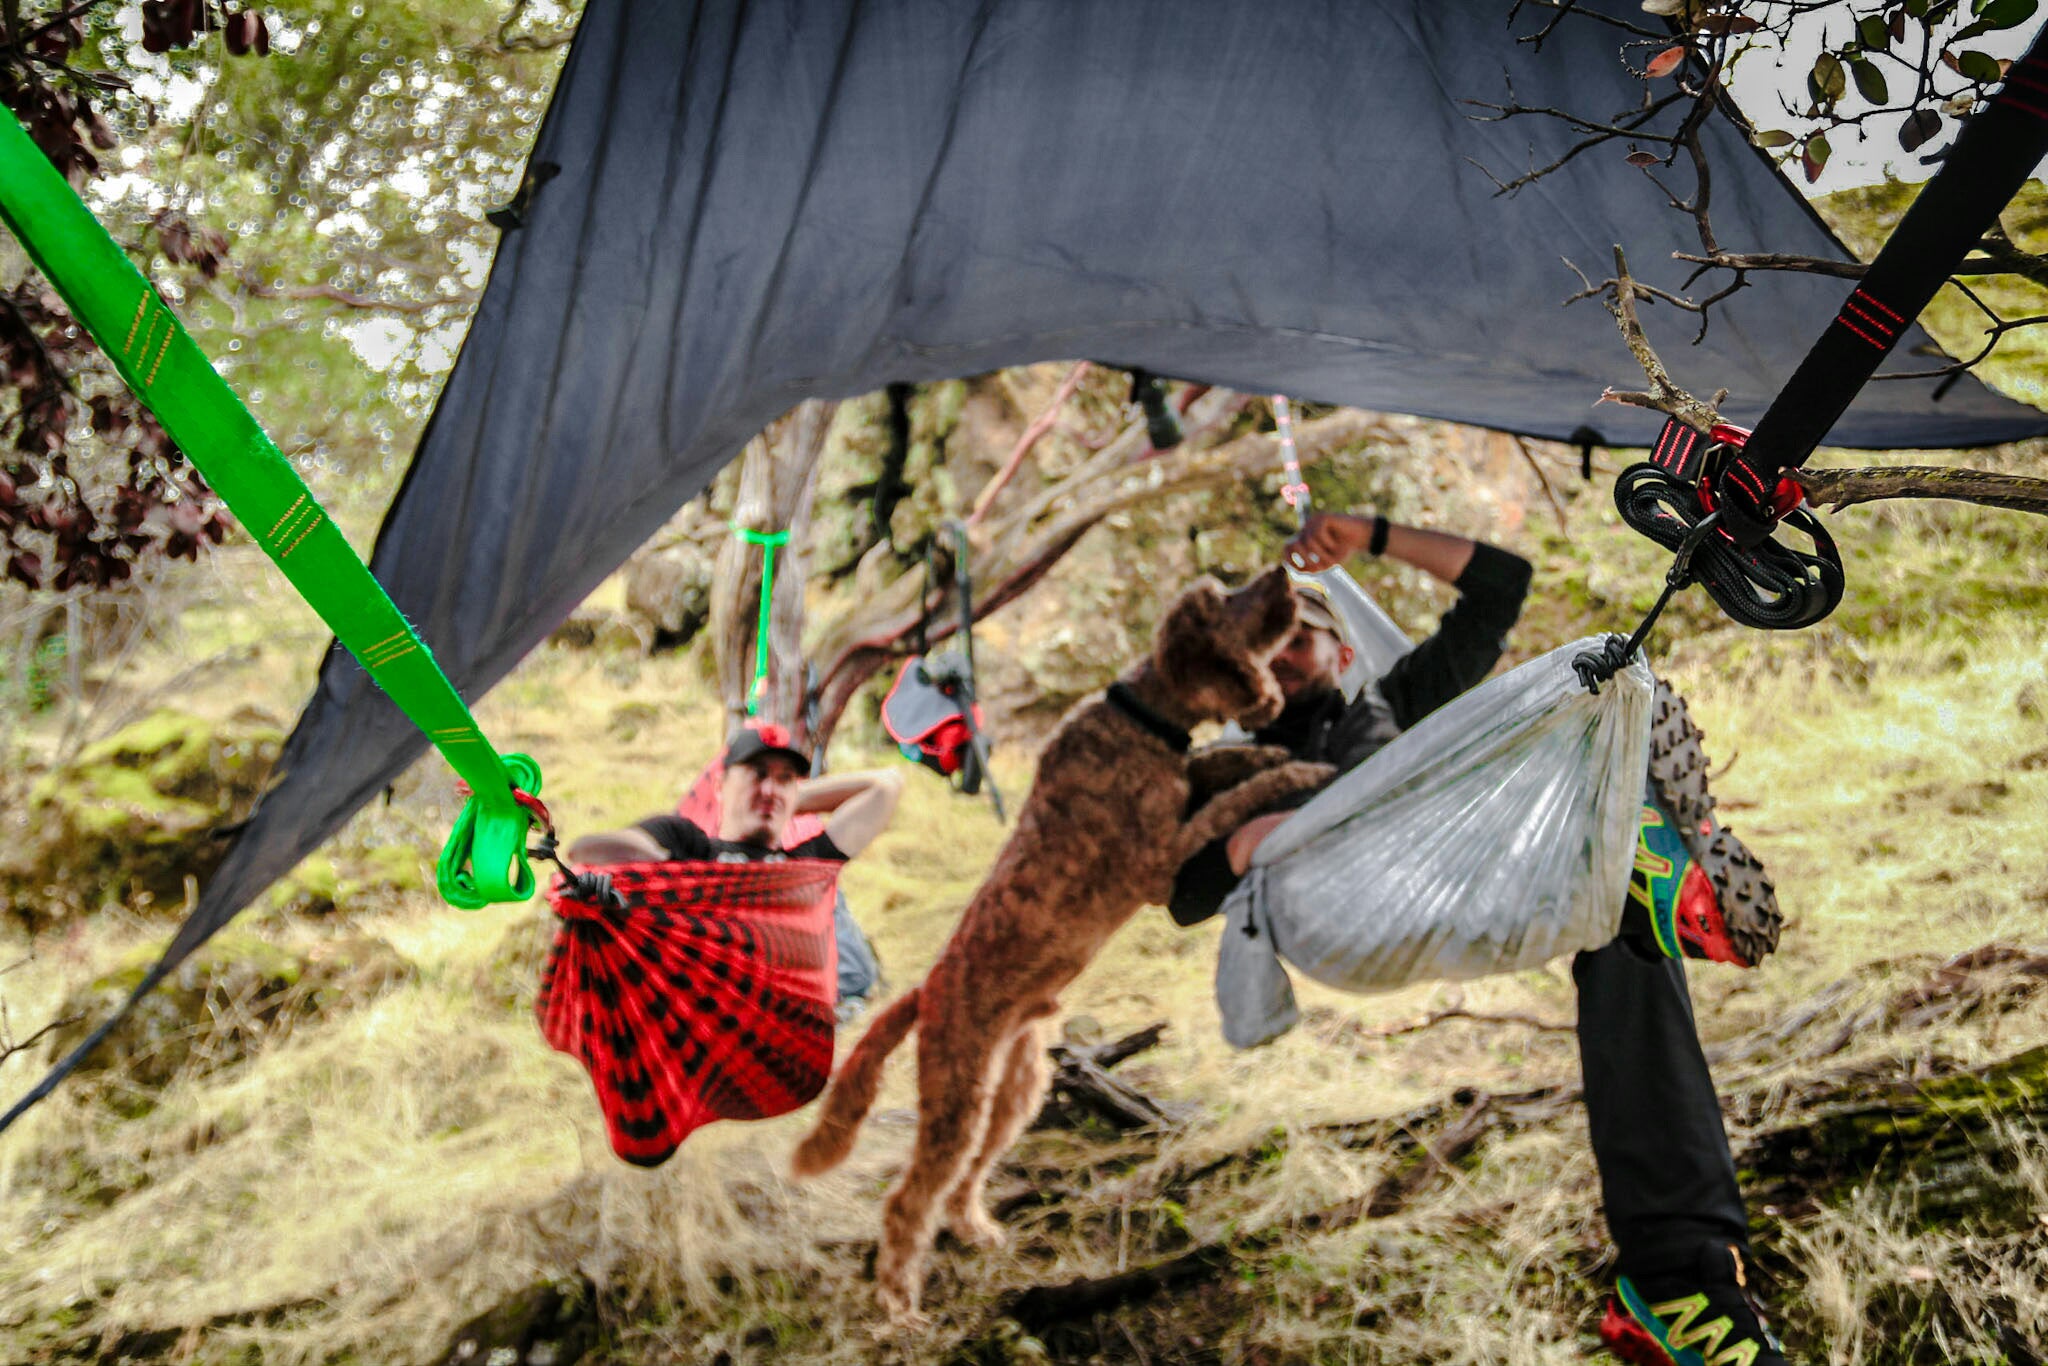 Are you ready for the April Showers? Hammock Camping in the Rain.